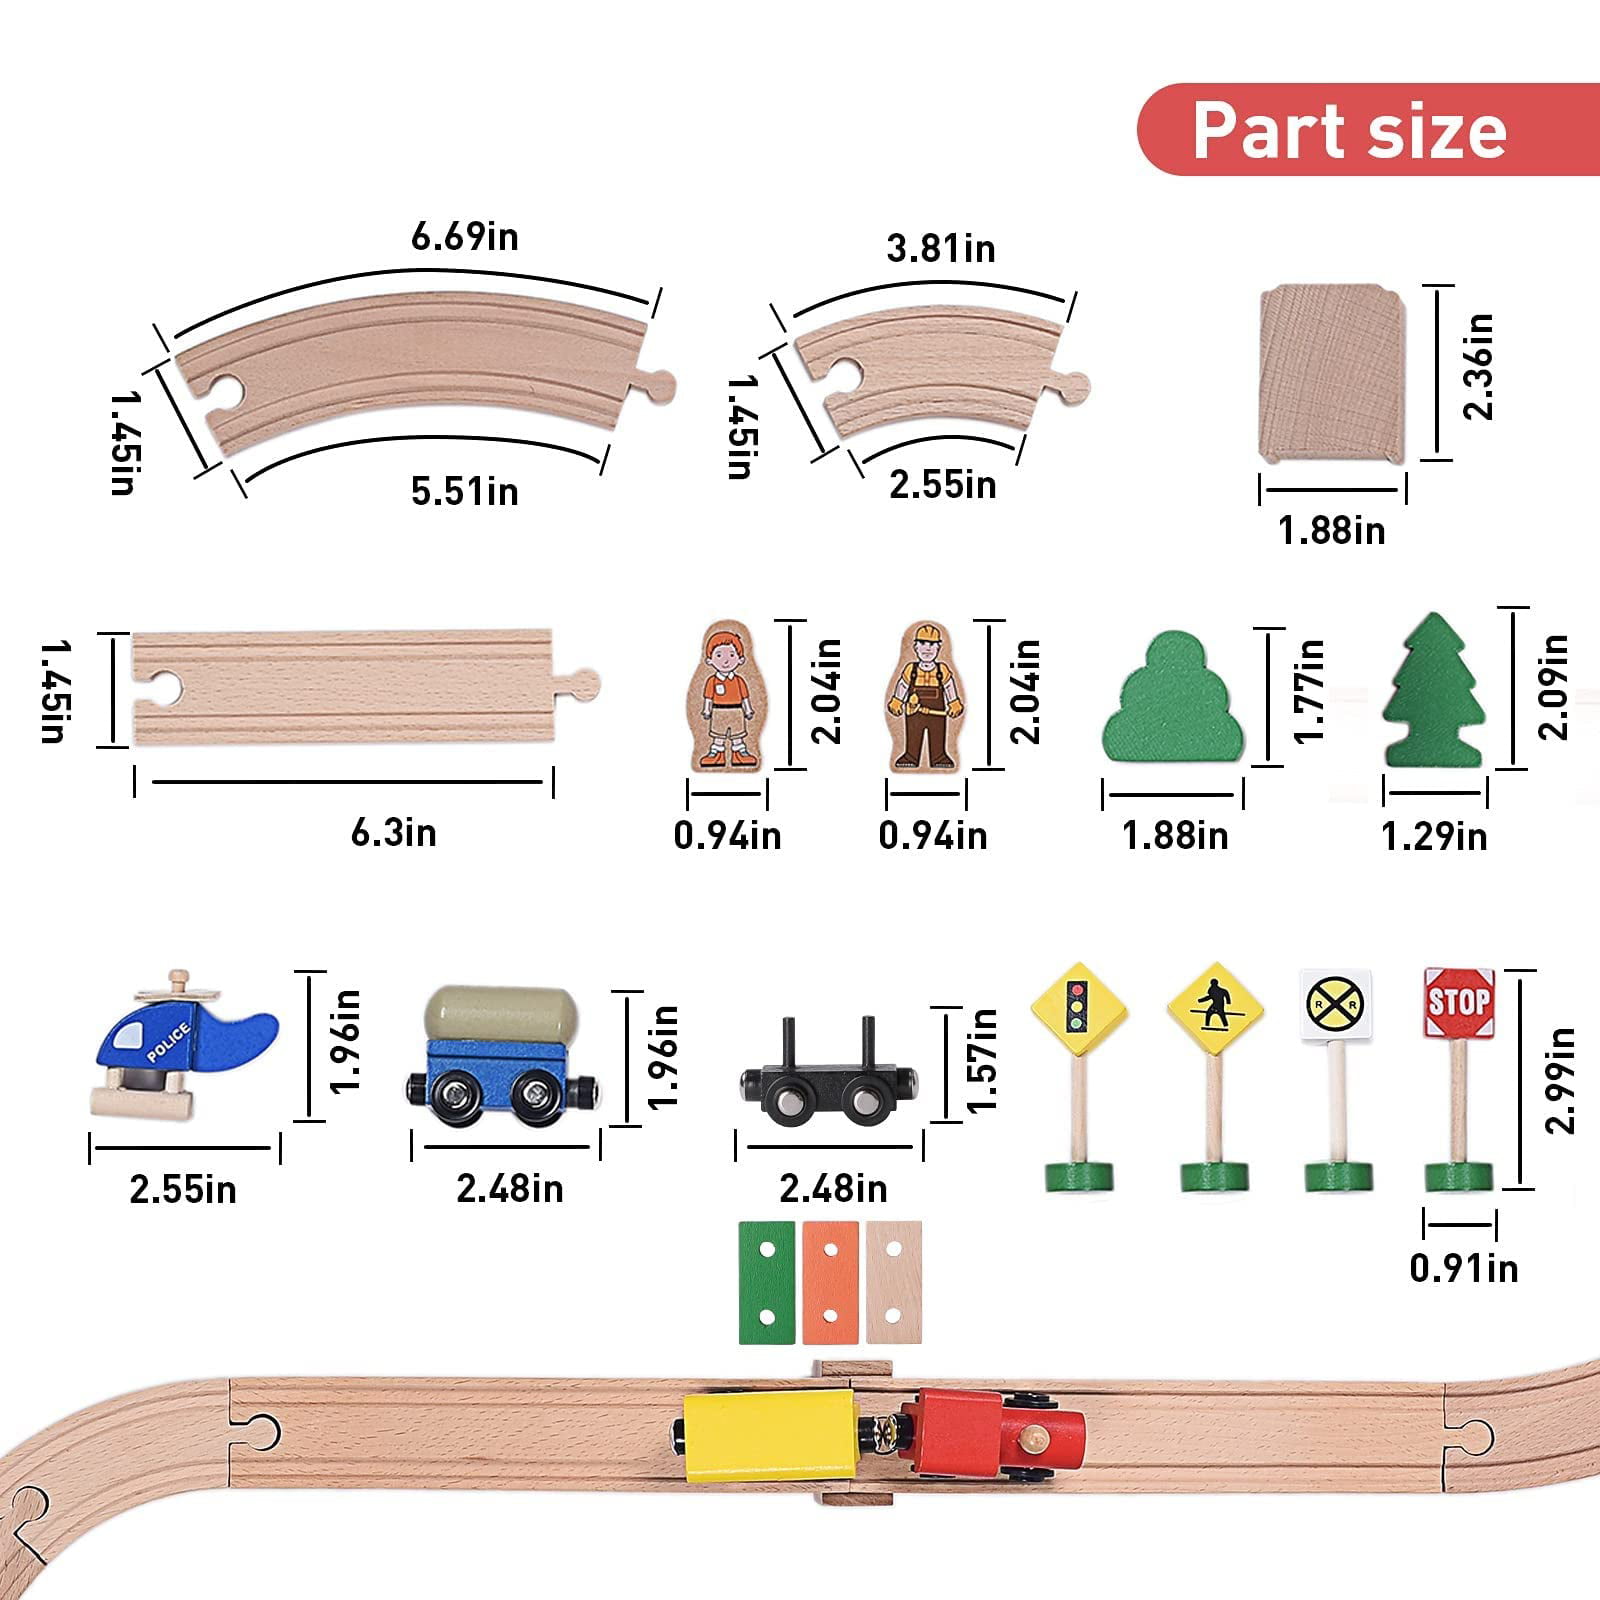 Wooden Train Set with Double-Side Train Tracks (37 pcs)